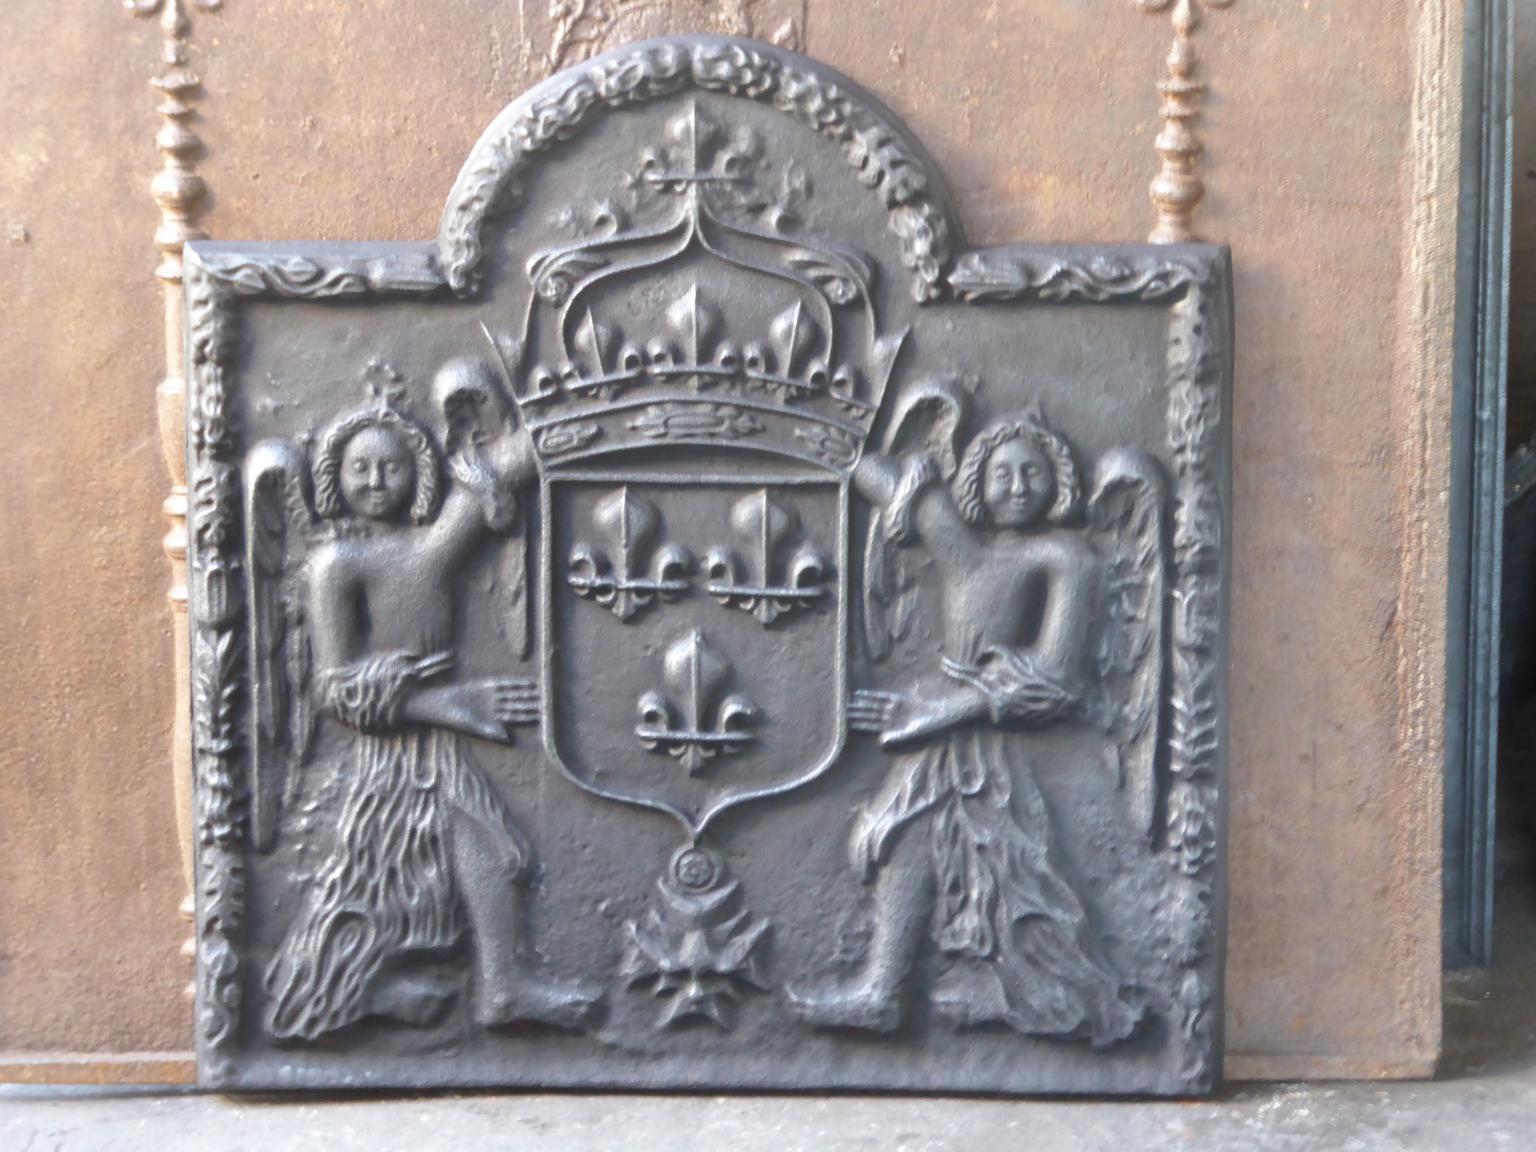 Coat of arms of the House of Bourbon, an originally French royal house that became a major dynasty in Europe. It delivered kings for Spain (Navarra), France, both Sicilies and Parma. Bourbon kings ruled France from 1589 up to the French revolution